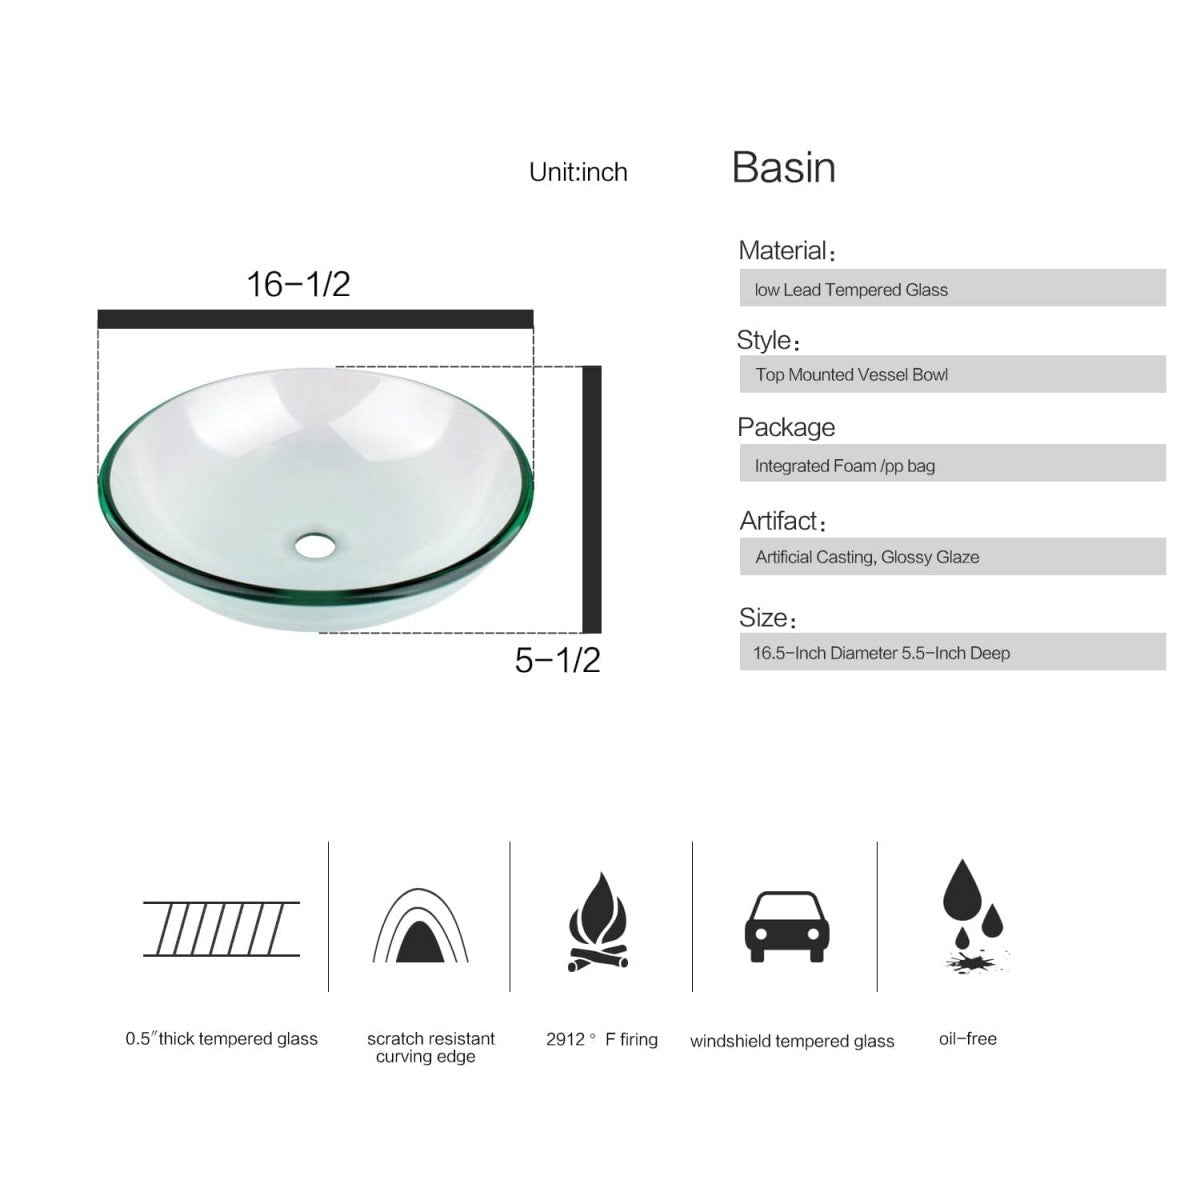 Elecwish glossy glass sink size and description